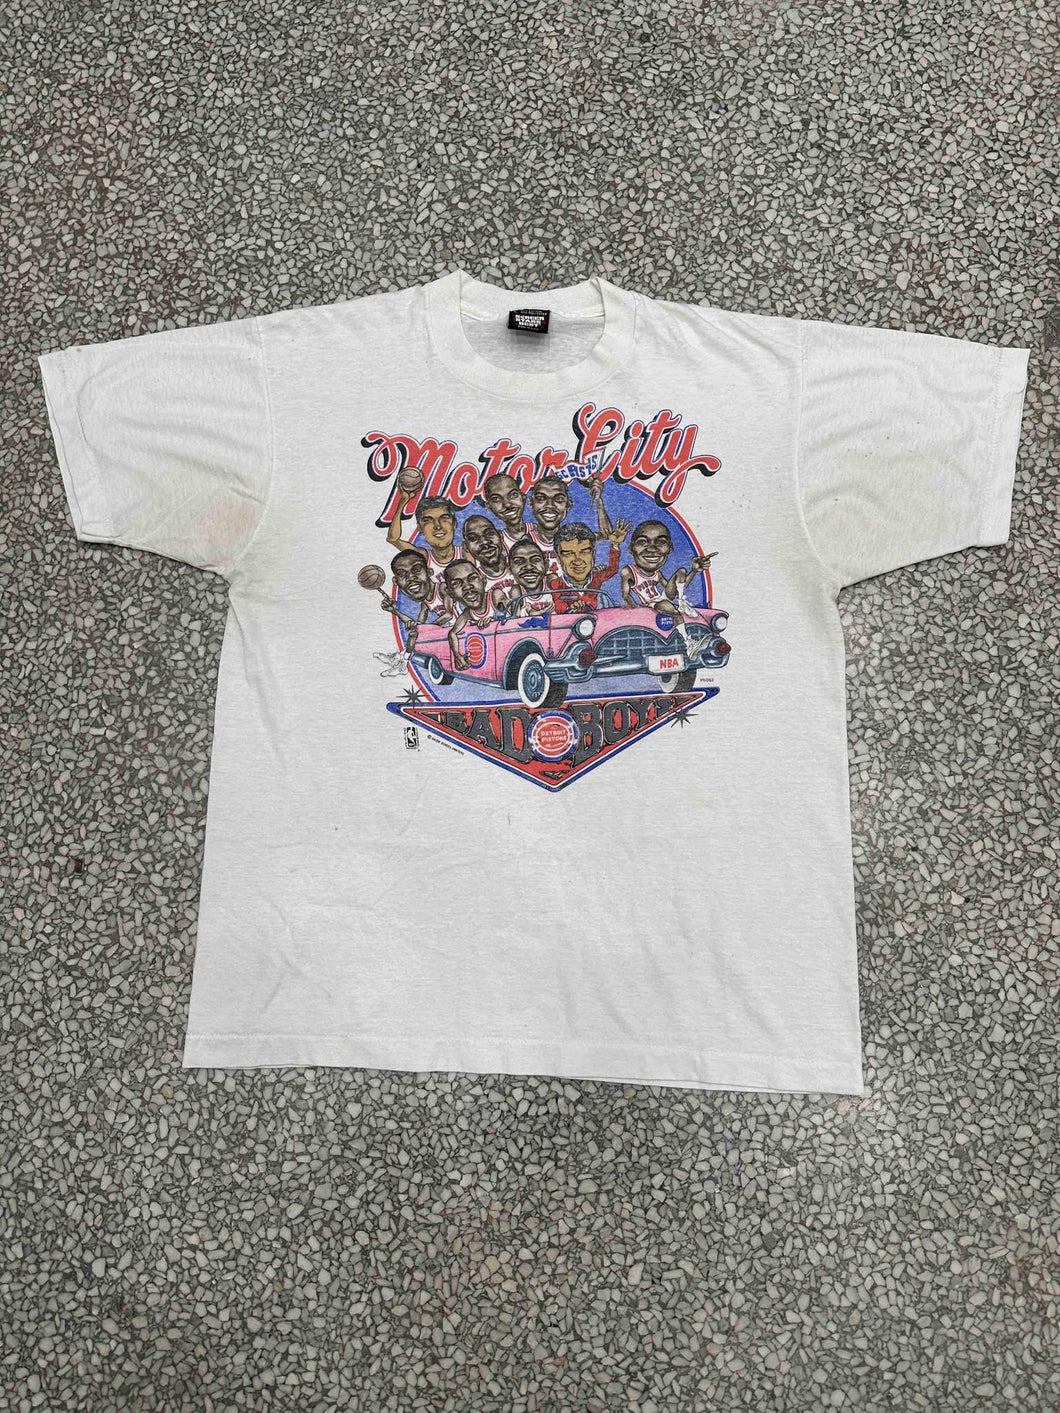 Detroit Pistons Vintage 80s Motor City Bad Boys Team Riding Pink Cadillac Paper Thin Faded Cream ABC Vintage 